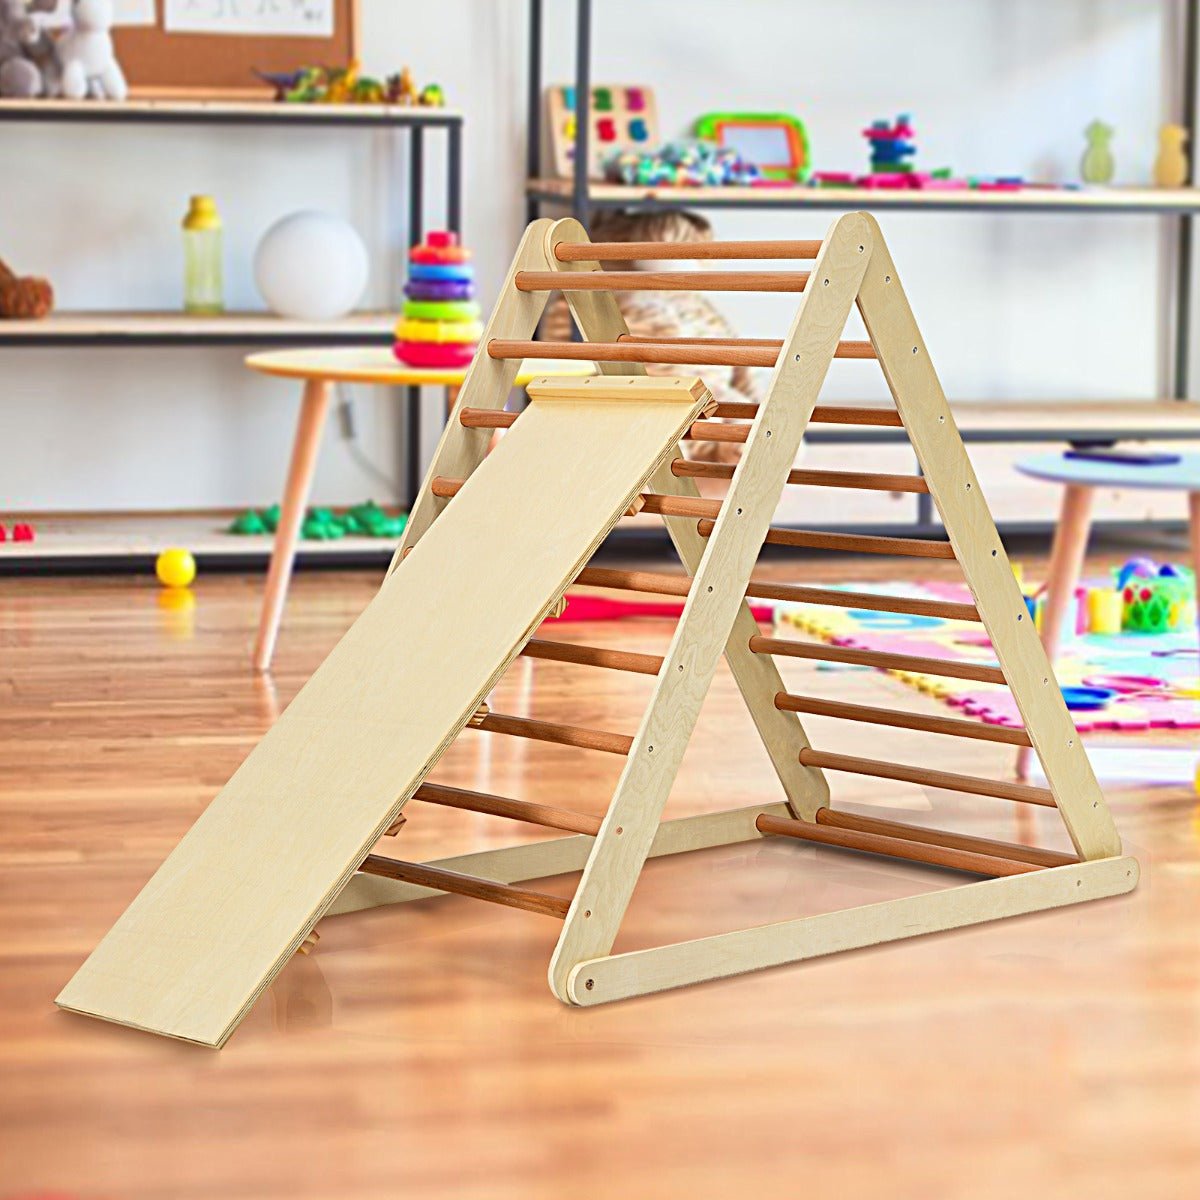 Natural Wooden Climbing Triangle Ladder - Safe Triangular Structure for Play